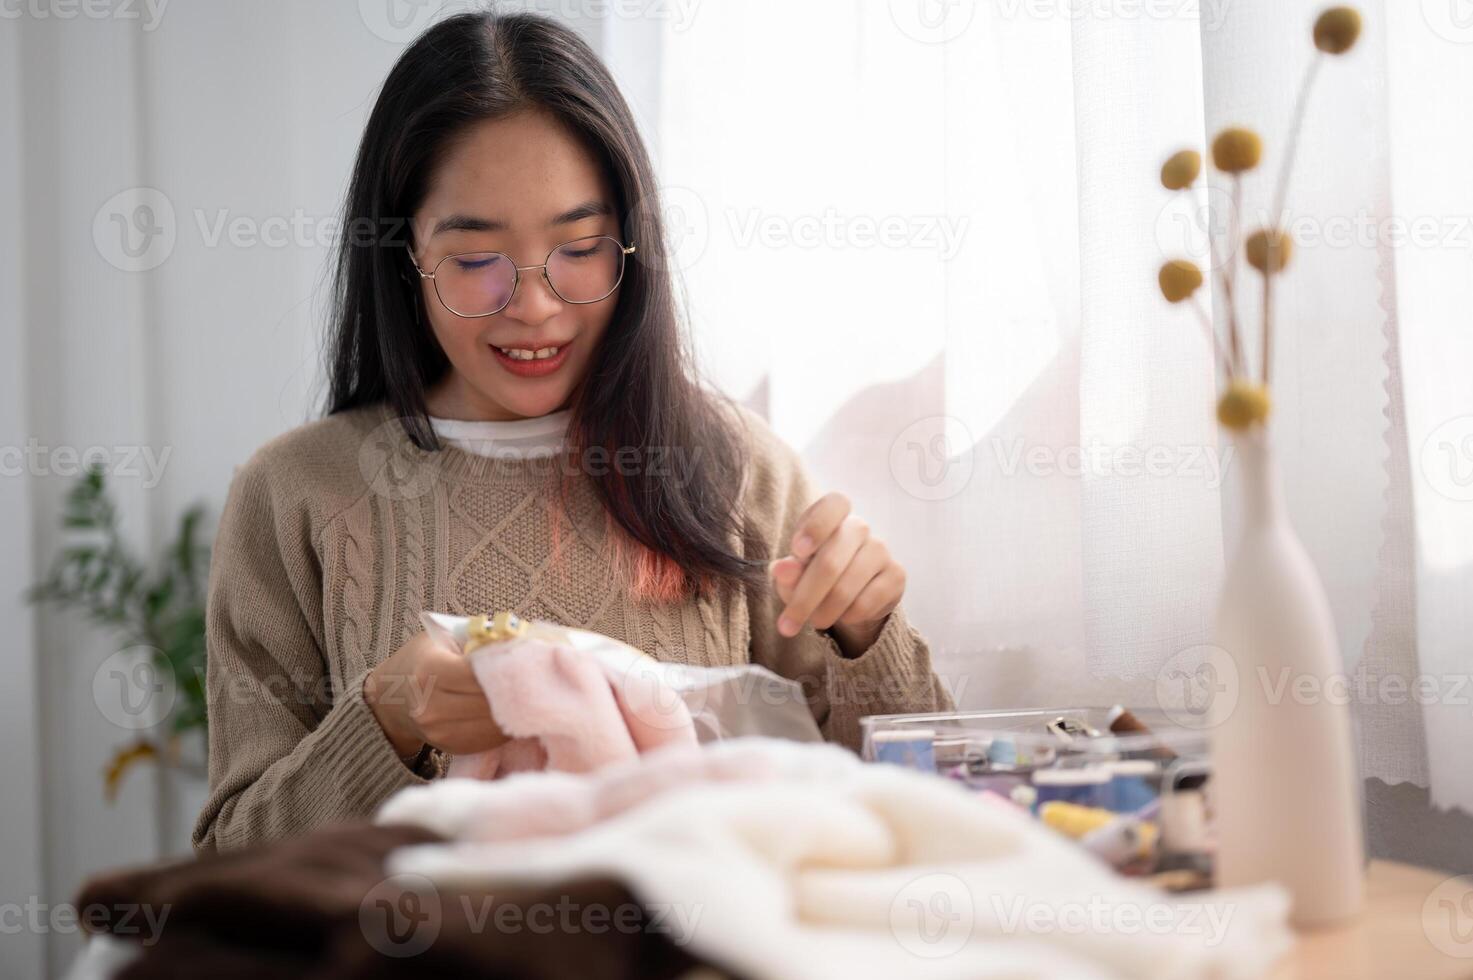 A focused young Asian woman threading a pattern on an embroidery frame, hand-sewing on cloth. photo